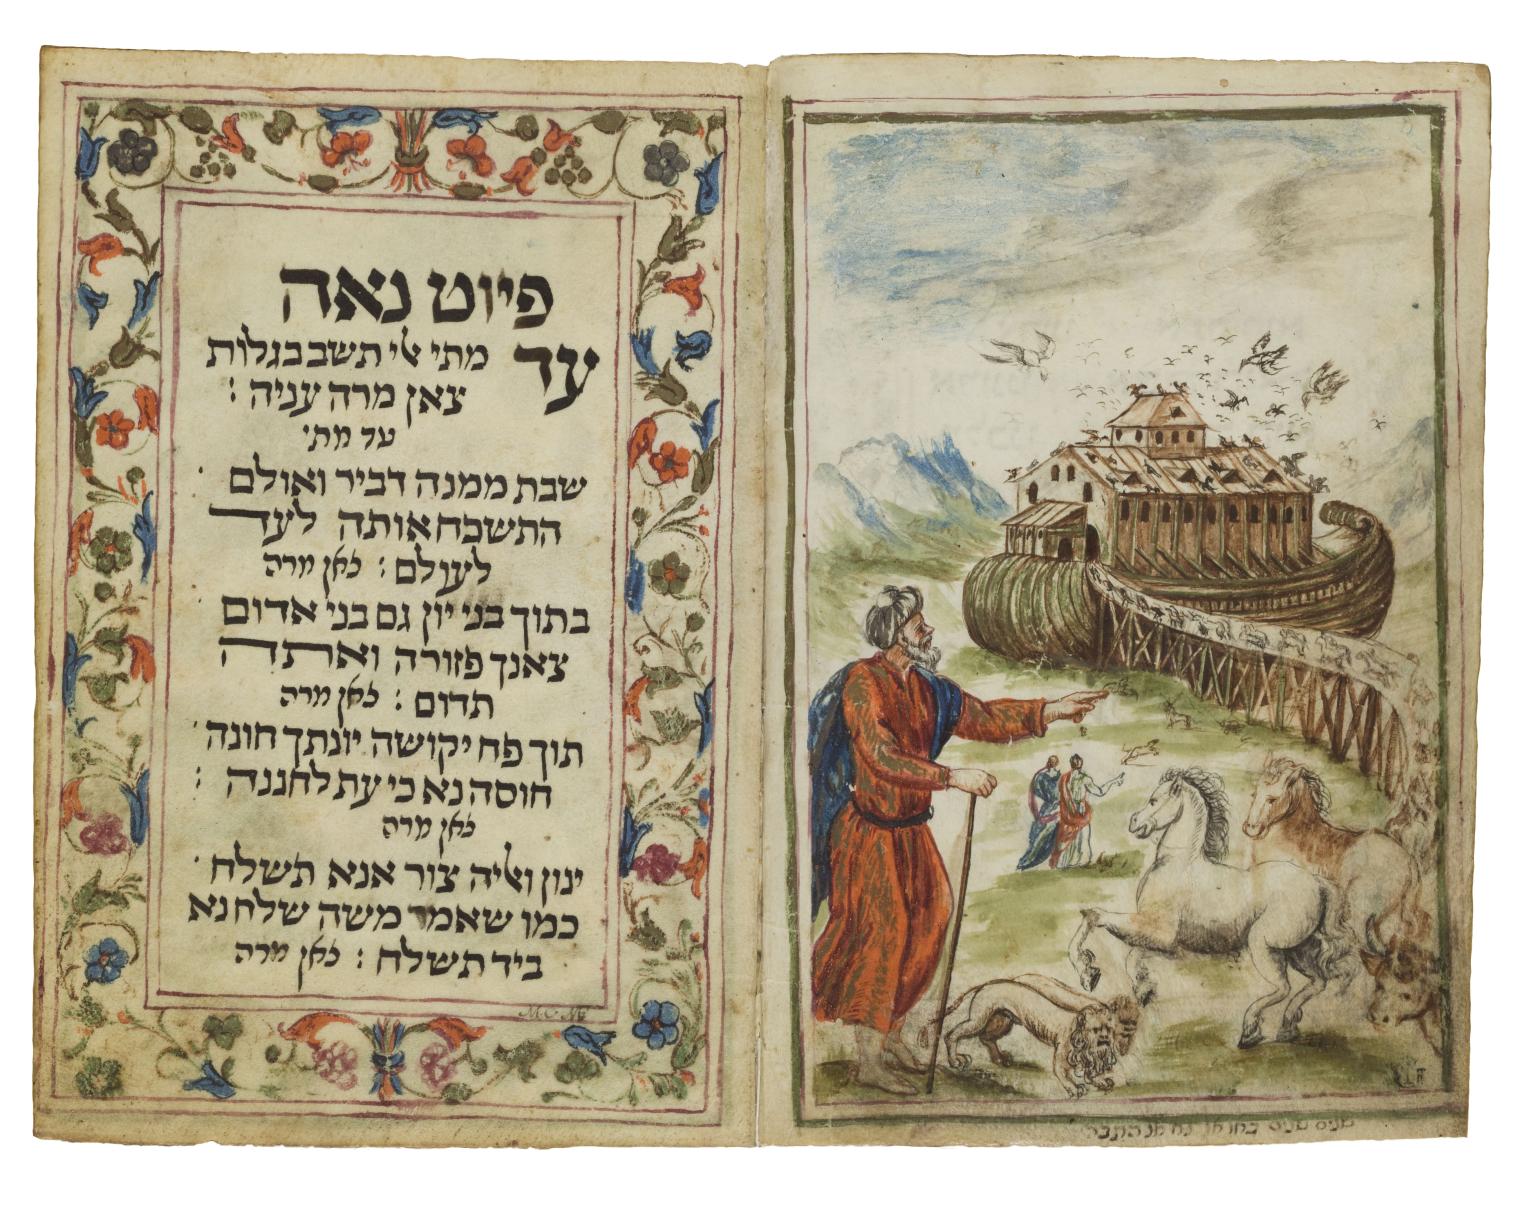 Facing-page manuscript with Hebrew text on left page with floral border and scene of man leading horses and lion to large ark on right page. 